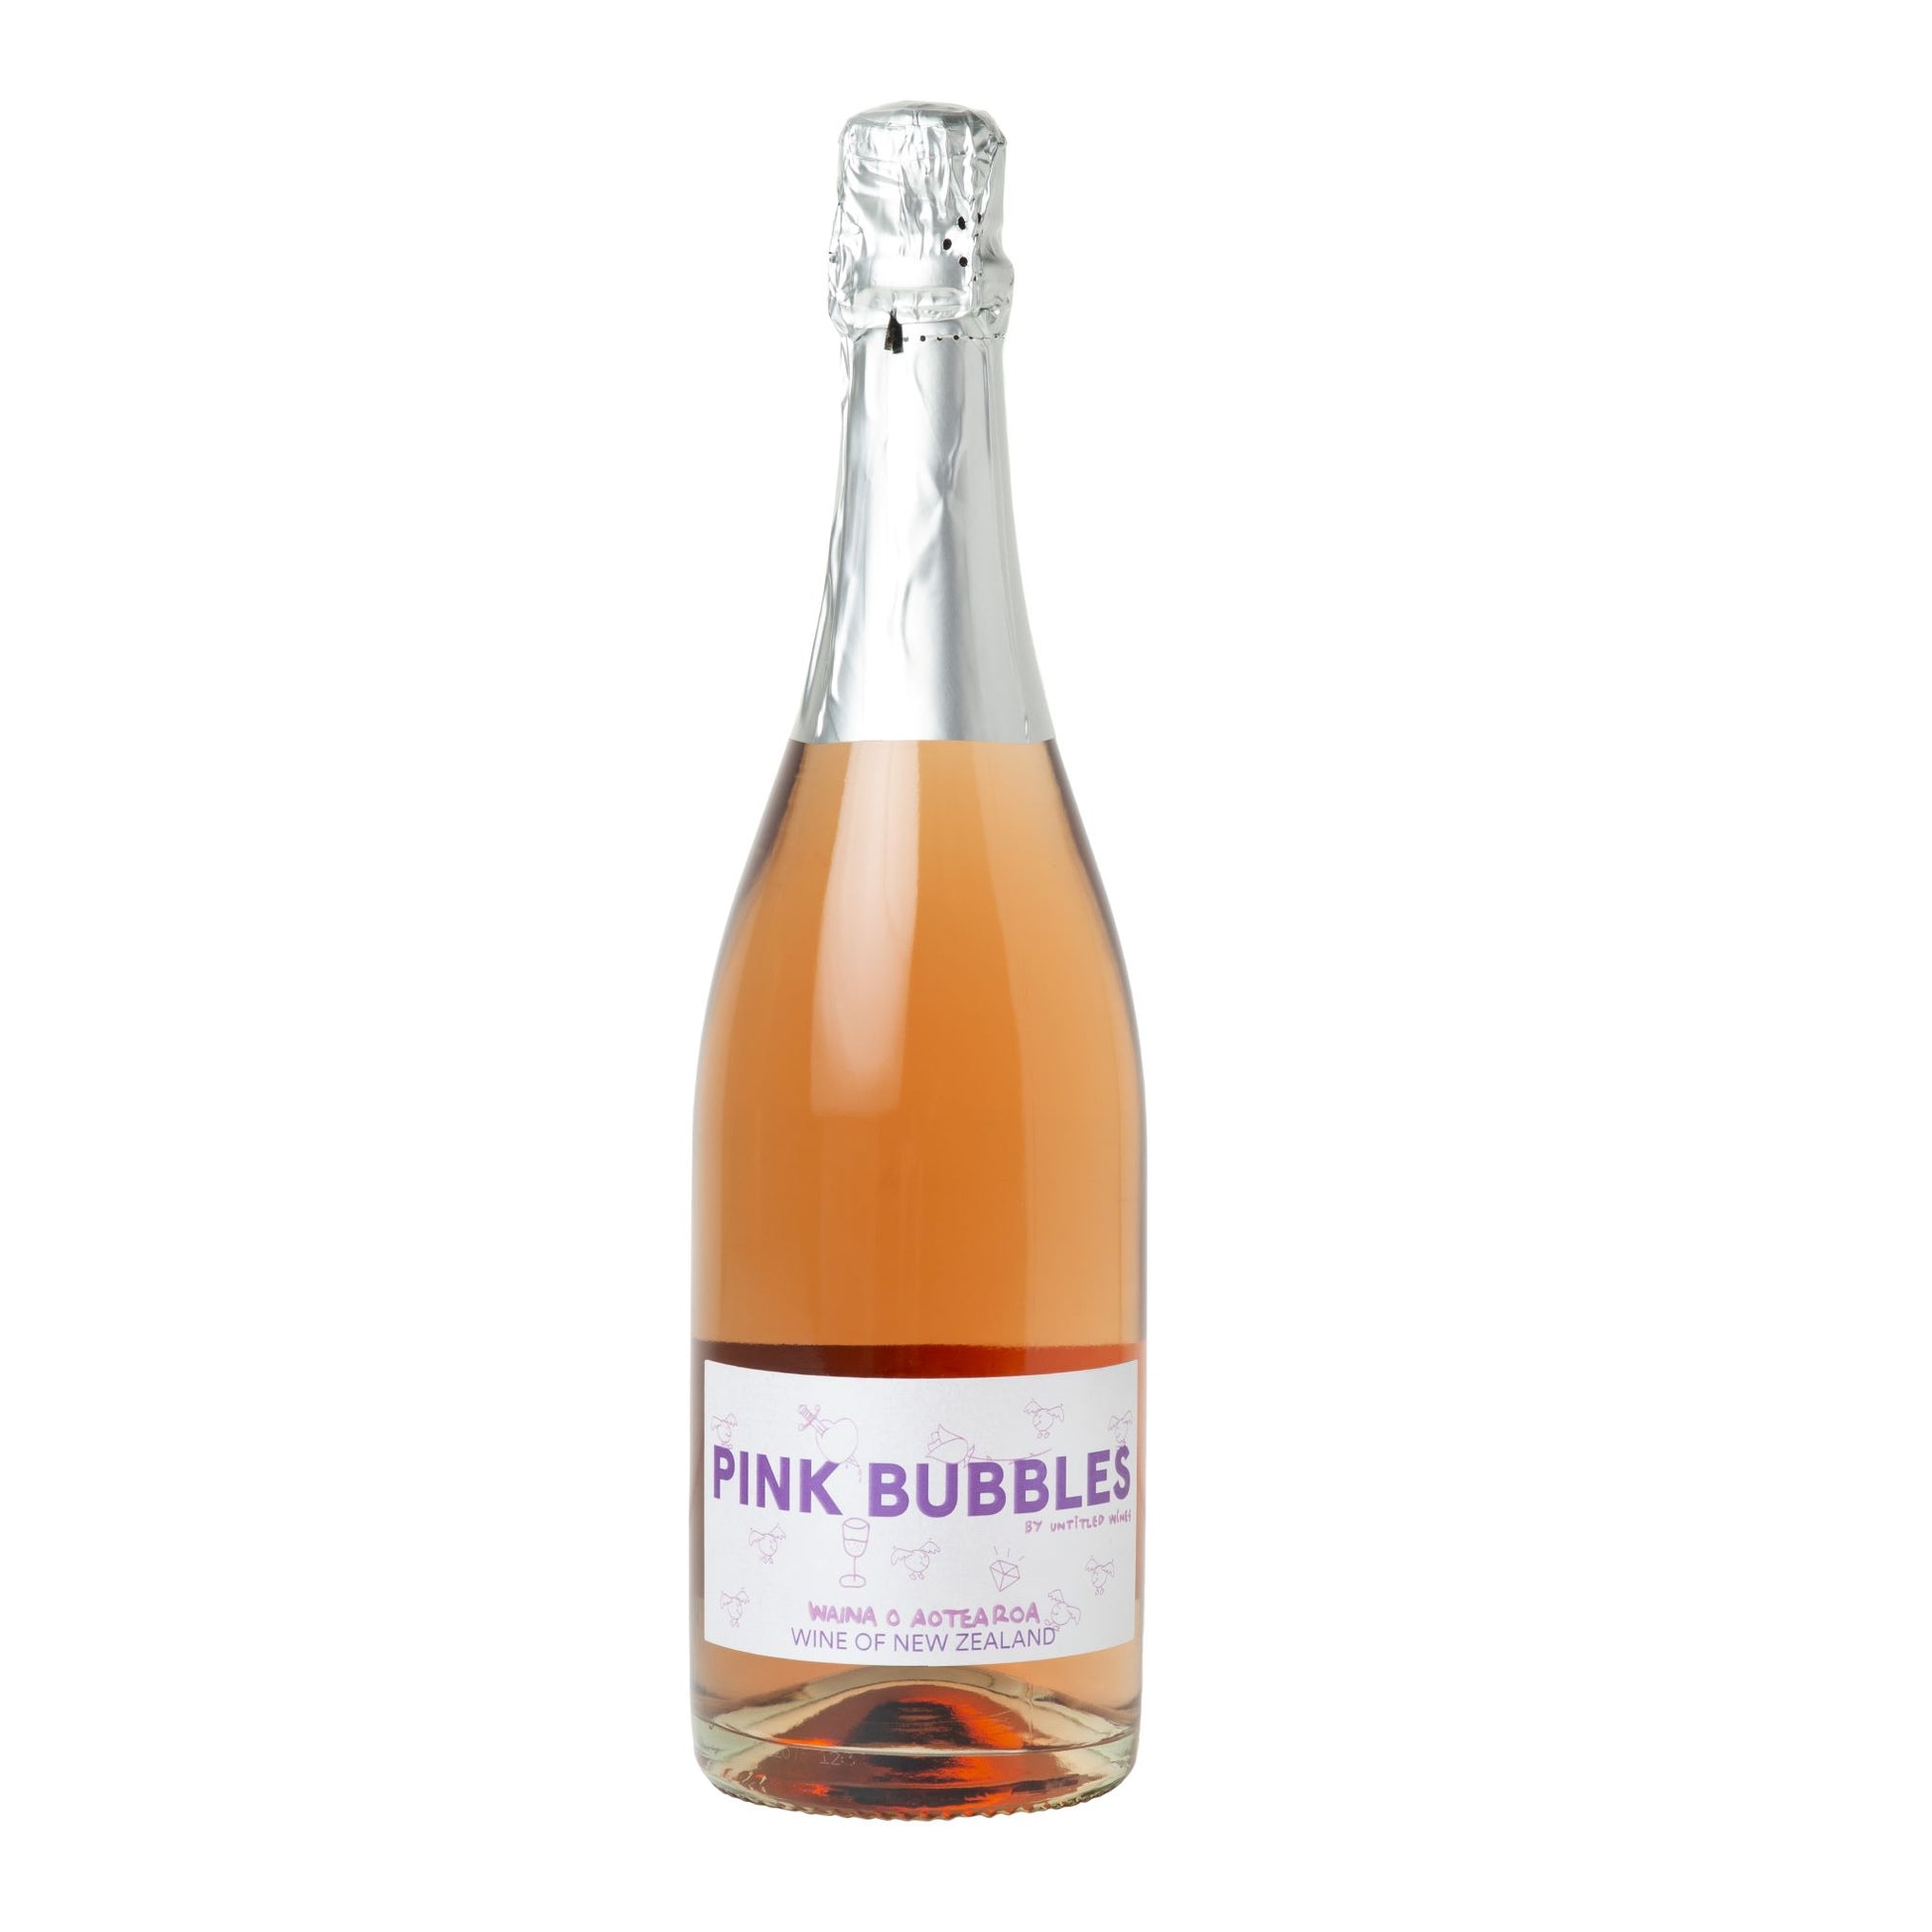 A bottle shot of Untitled's Pink Bubbles - Sparkling Wine of New Zealand. Best wines online